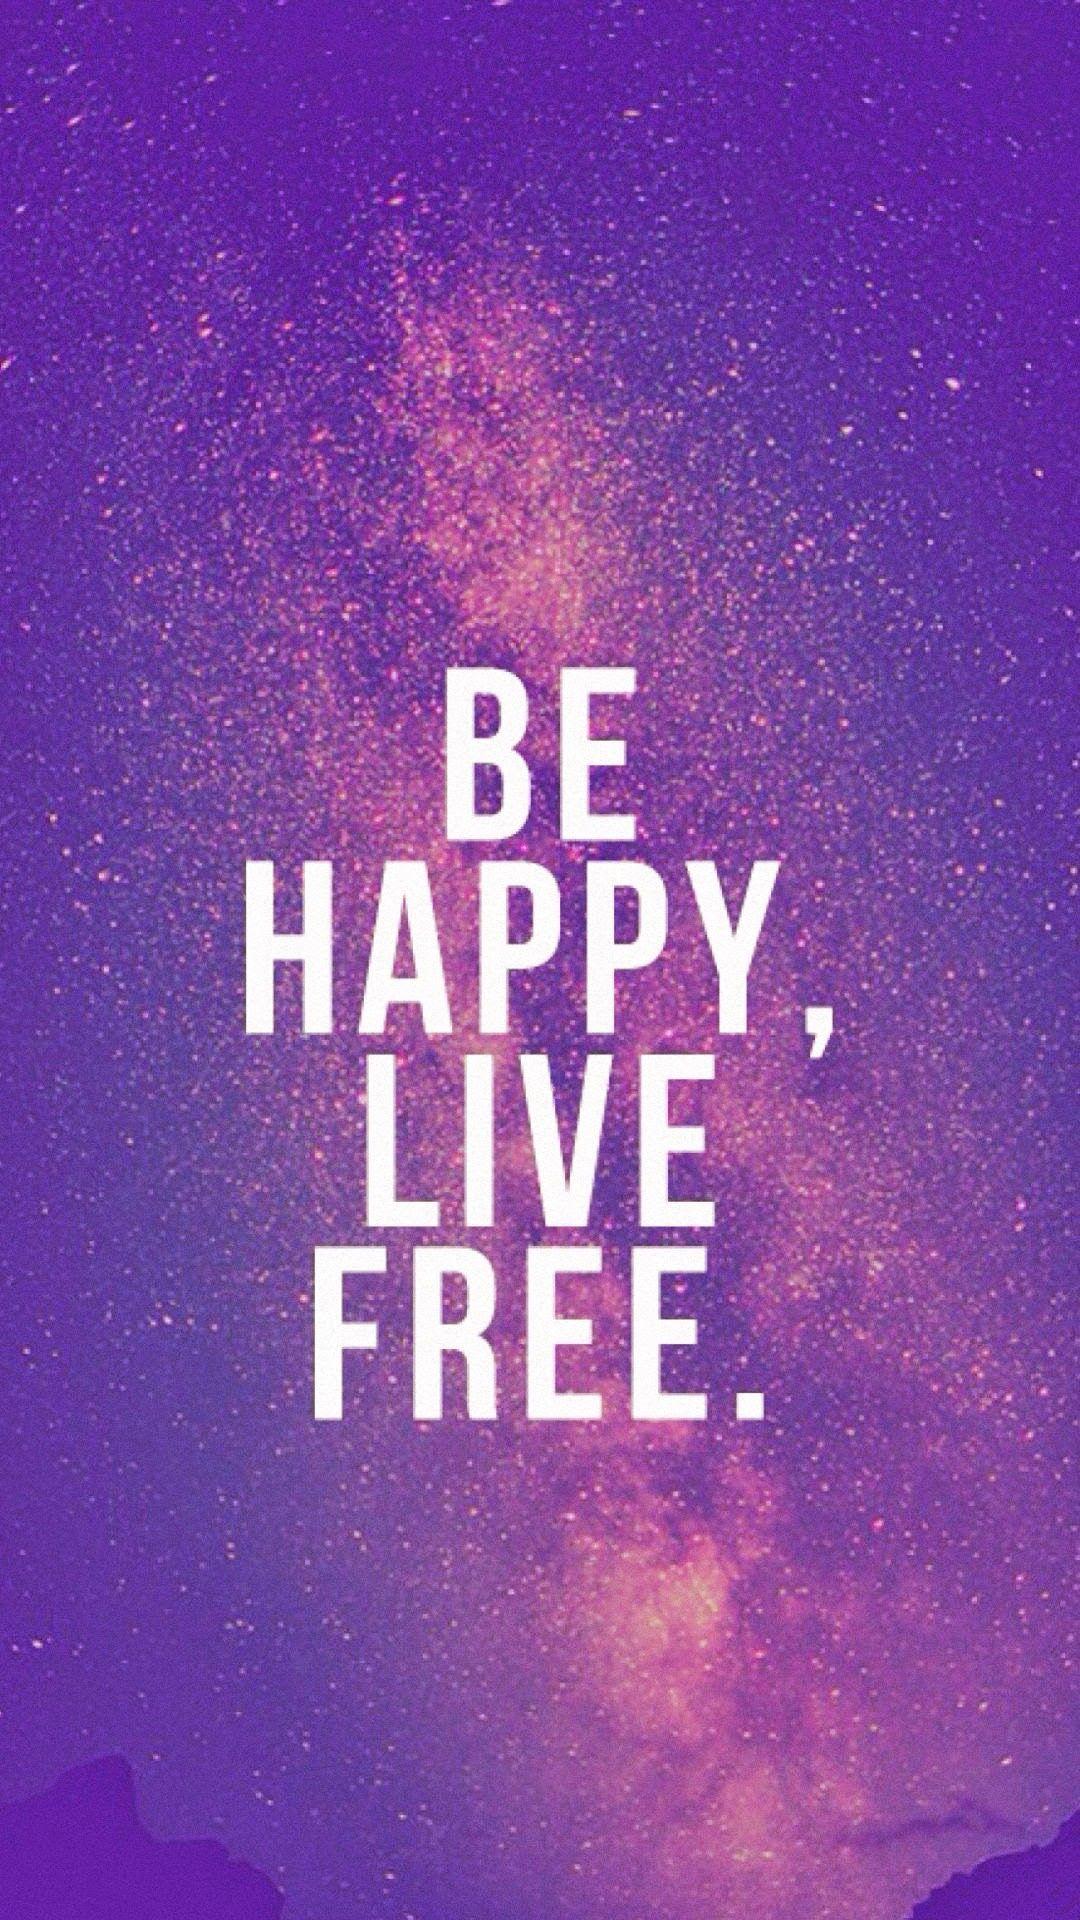 Live Free. New beginning quotes, Quote iphone, Wallpaper quotes